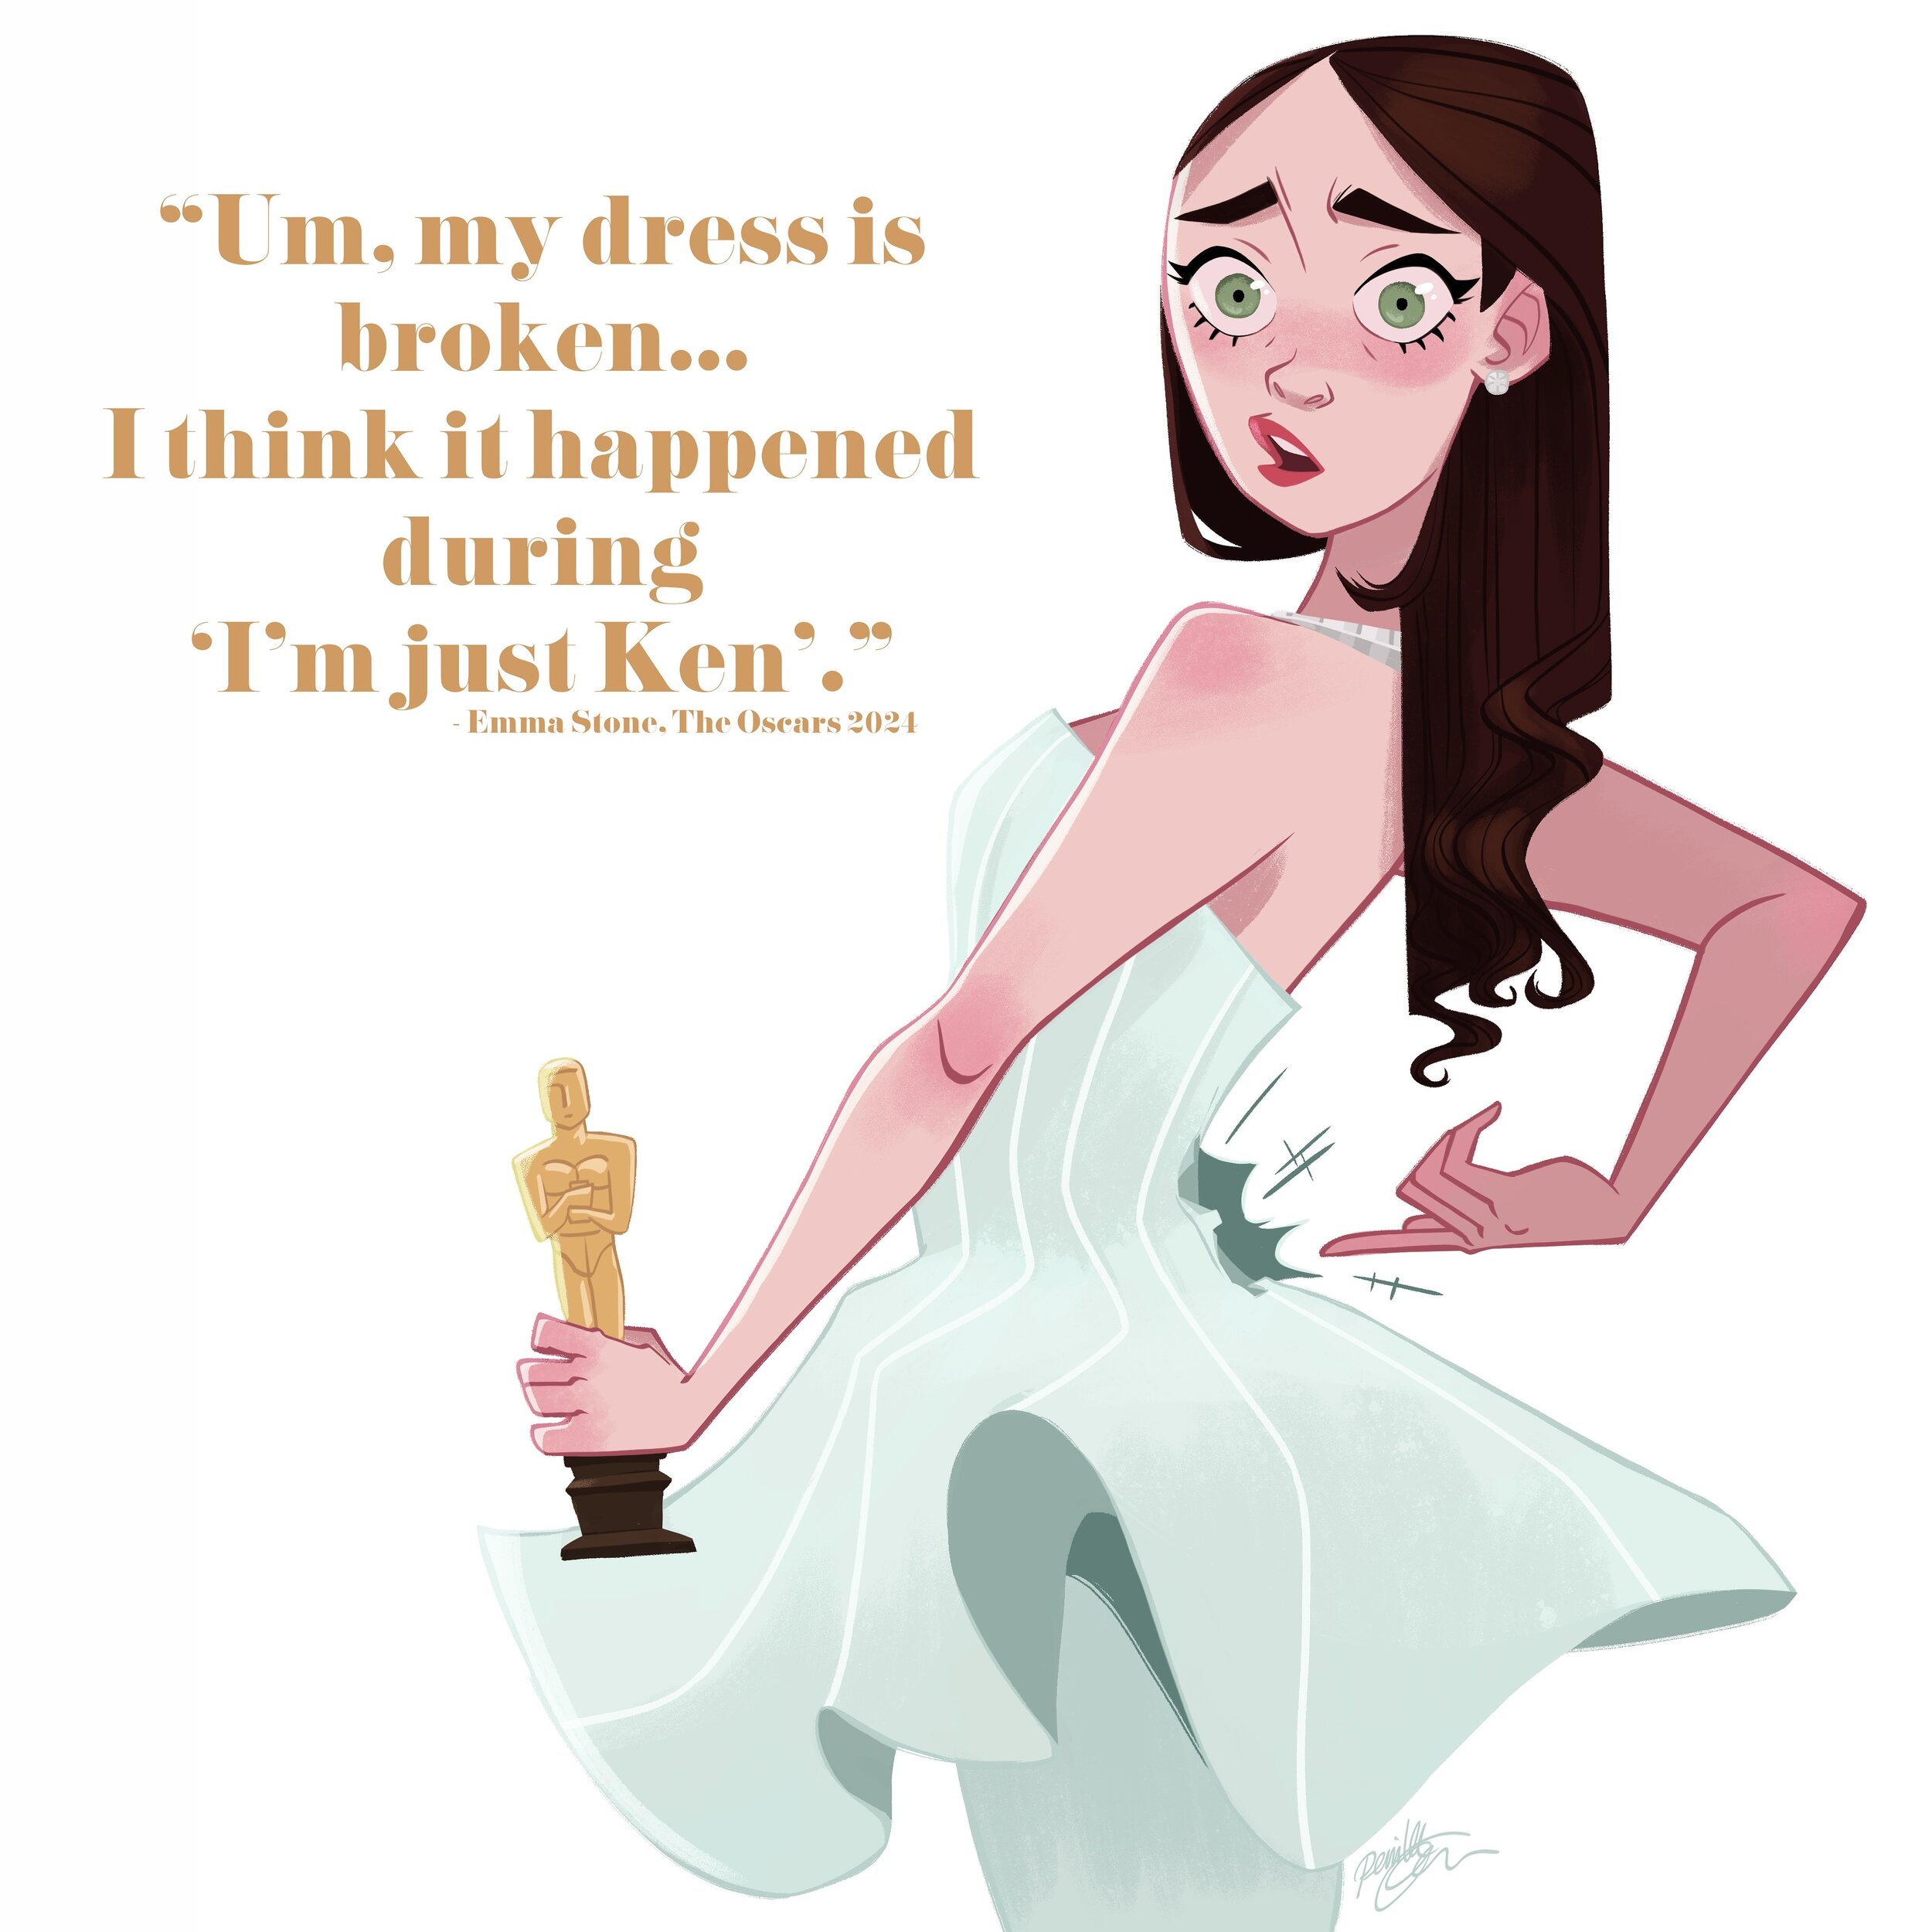 My favorite Oscar moment was seeing Emma Stone&rsquo;s expression when winning the award and being so cute about her dress&rsquo;s zipper breaking. A great #oscarmoment! 

#girlsinanimation #emmastone #poorthings #theacademyawards #theoscars2024 @the